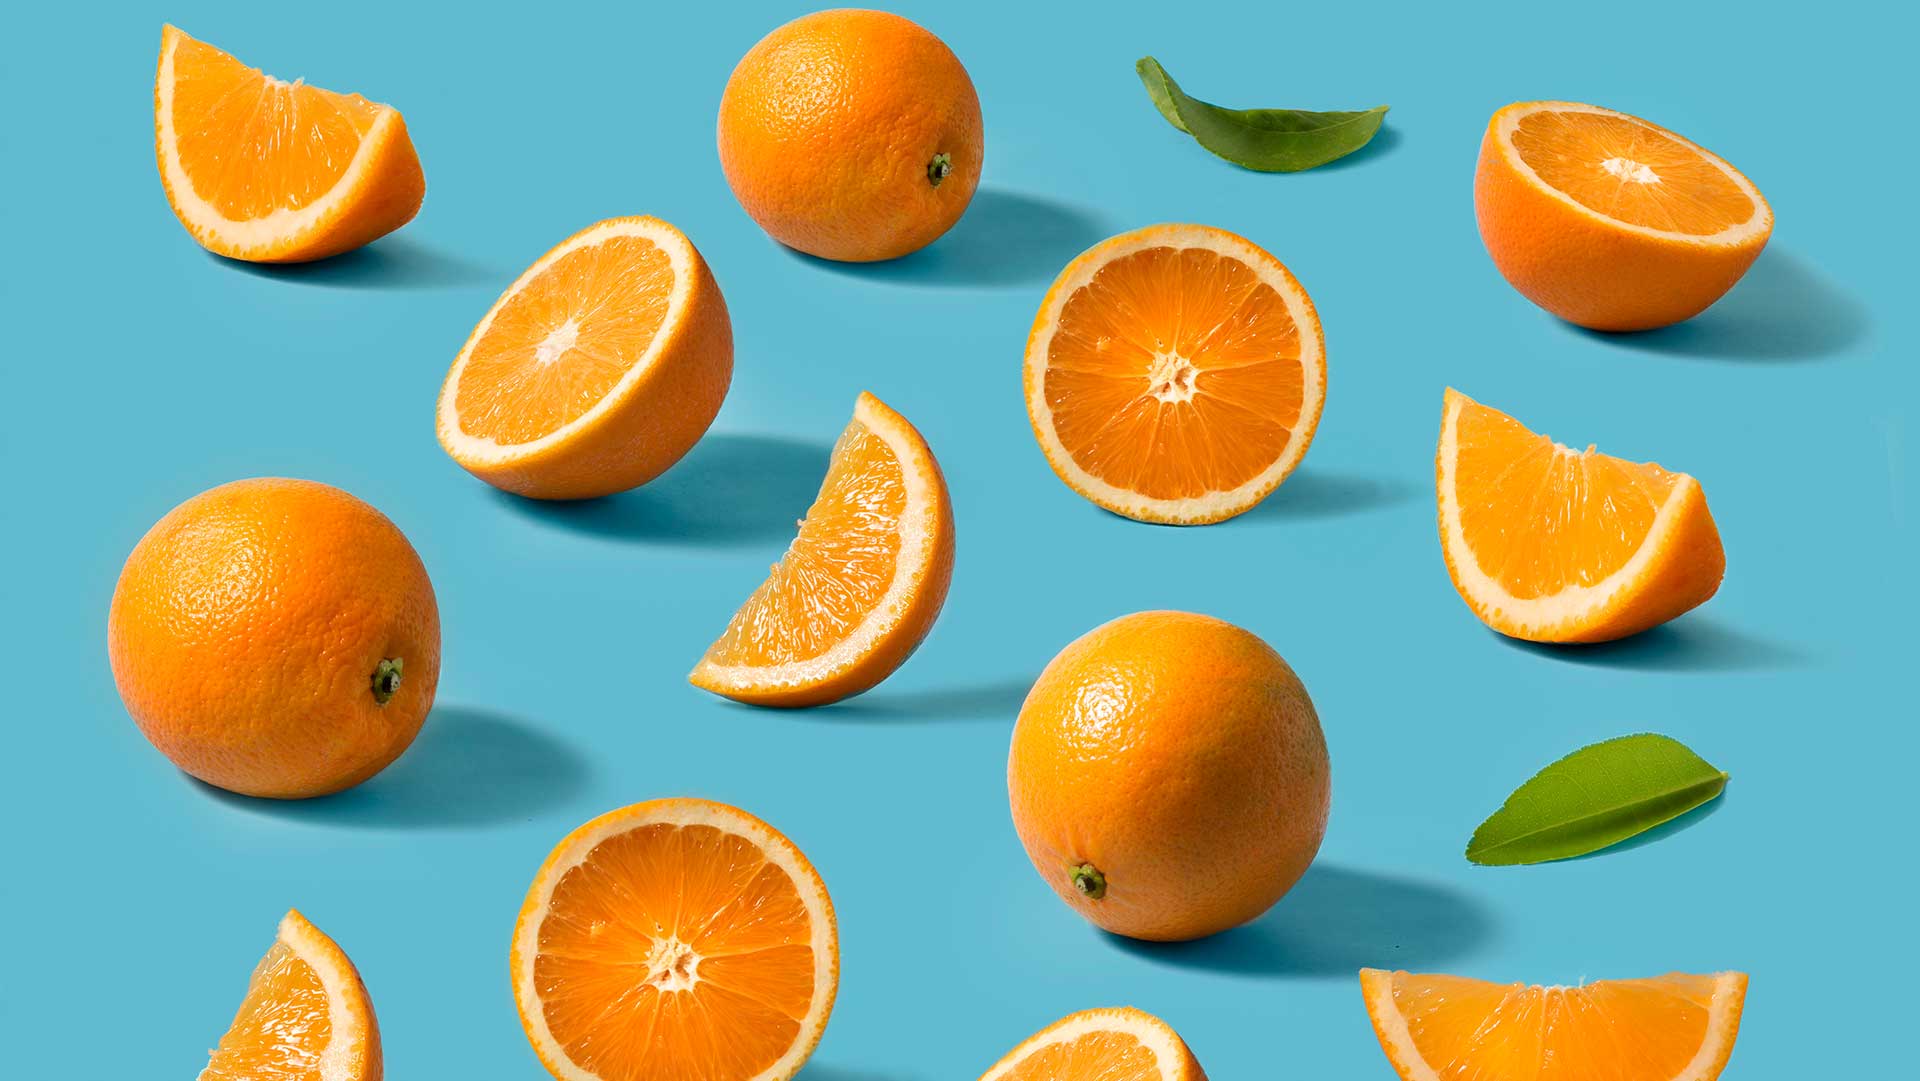 How vitamin C can benefit your skin